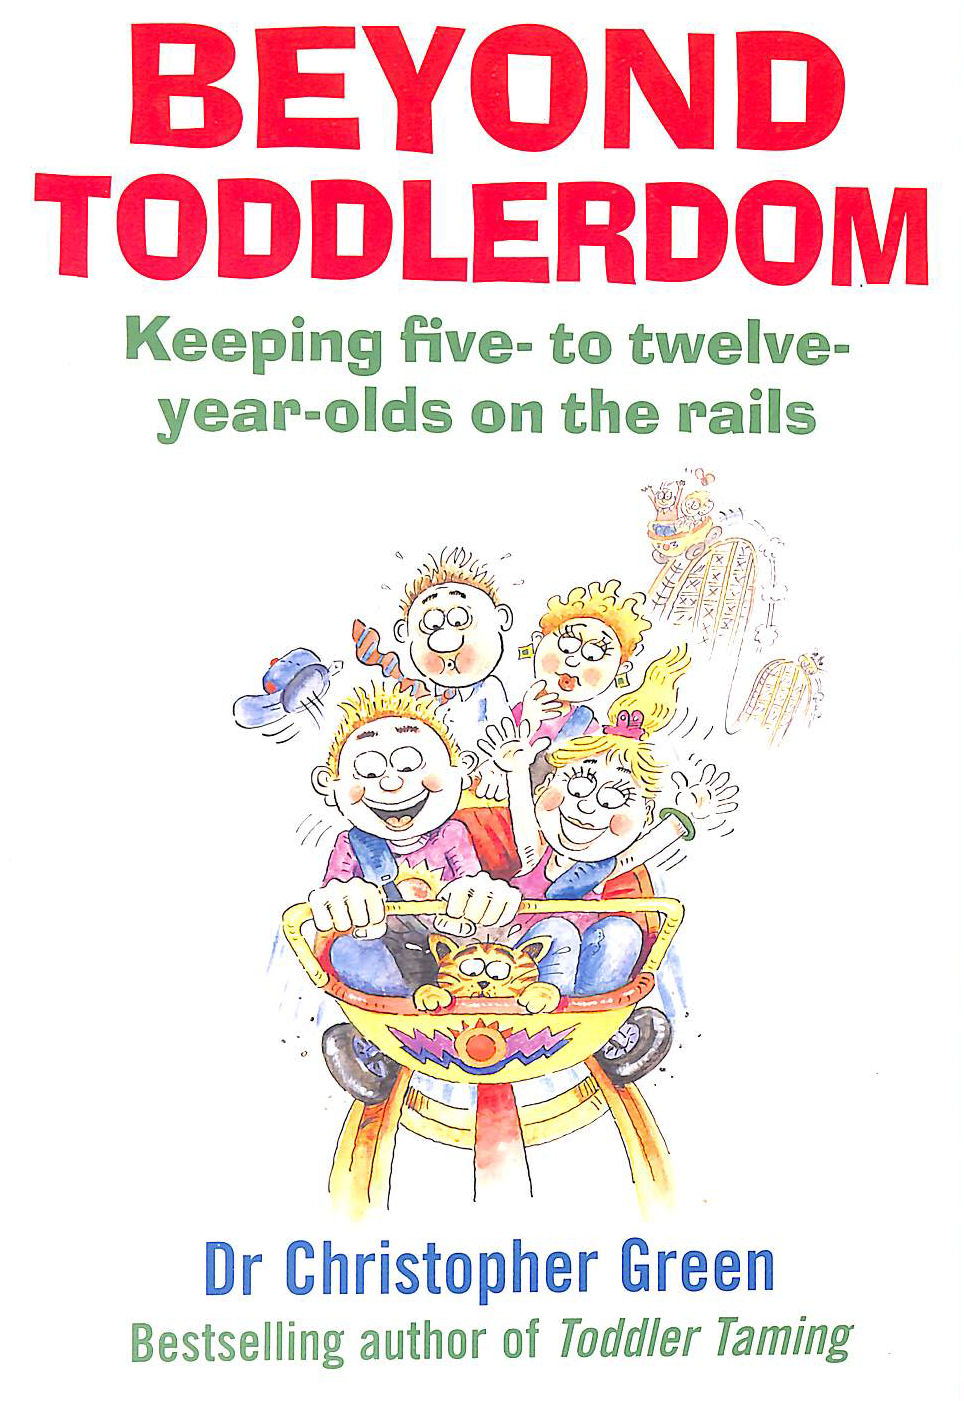 DR CHRISTOPHER GREEN - Beyond Toddlerdom: Keeping five- to twelve- year-olds on the rails